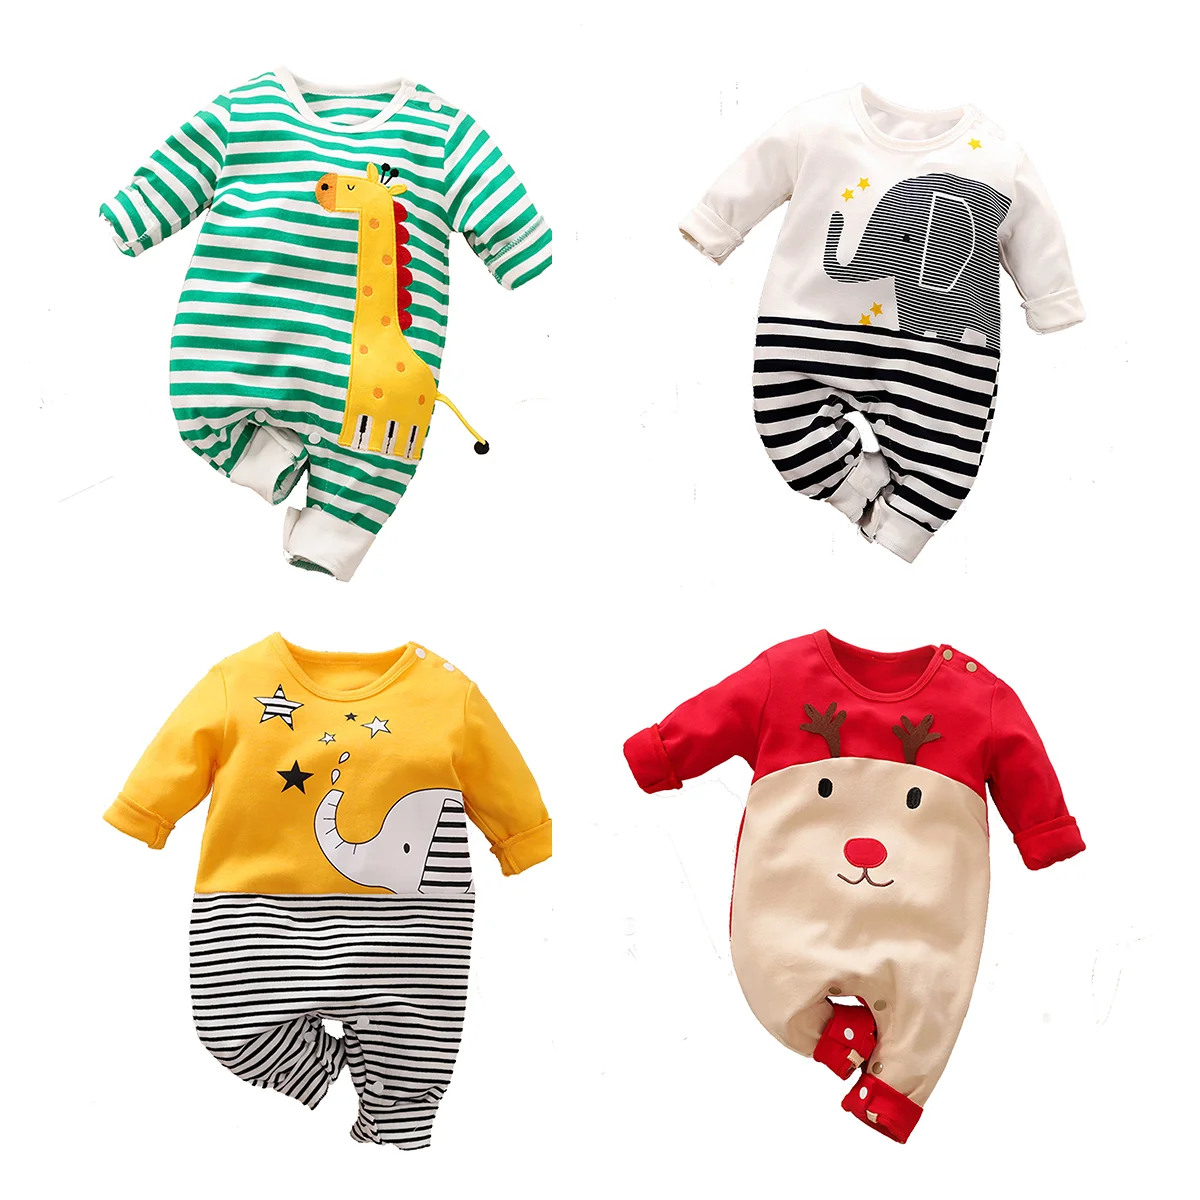 

Hot Salling Baby Romper Summer Single Piece 100% Cotton Childrens Clothes Boy Short Sleeve Onesie long Sleeve ropa bebe